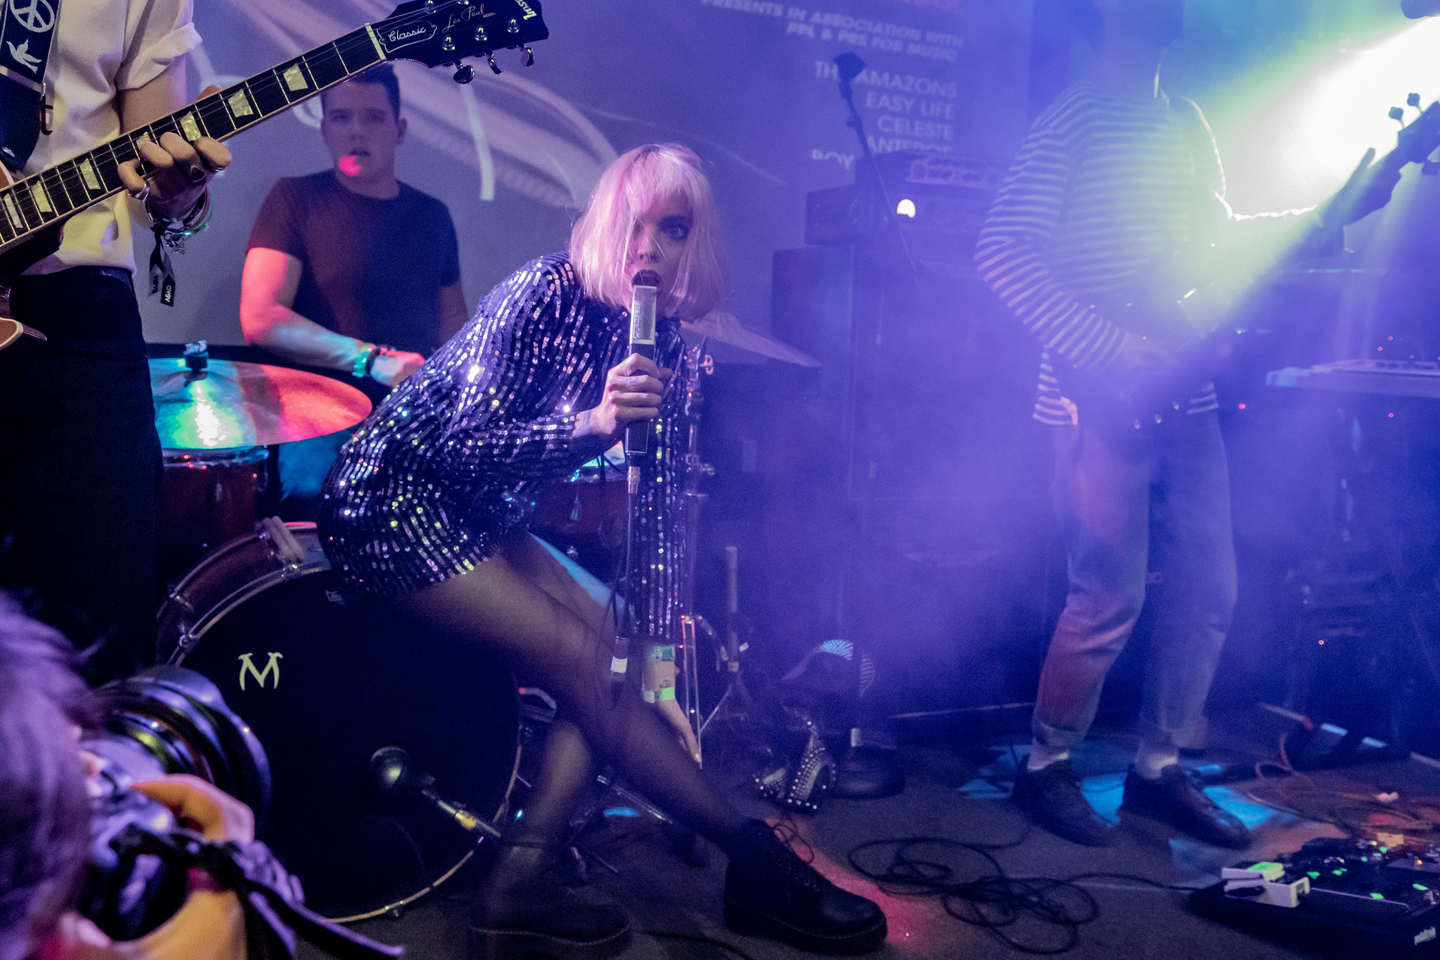 Anteros at British Music Embassy @ Latitude 30, presented by BBC Radio 1 in association with PPL & PRS for Music – Photo by David Walker